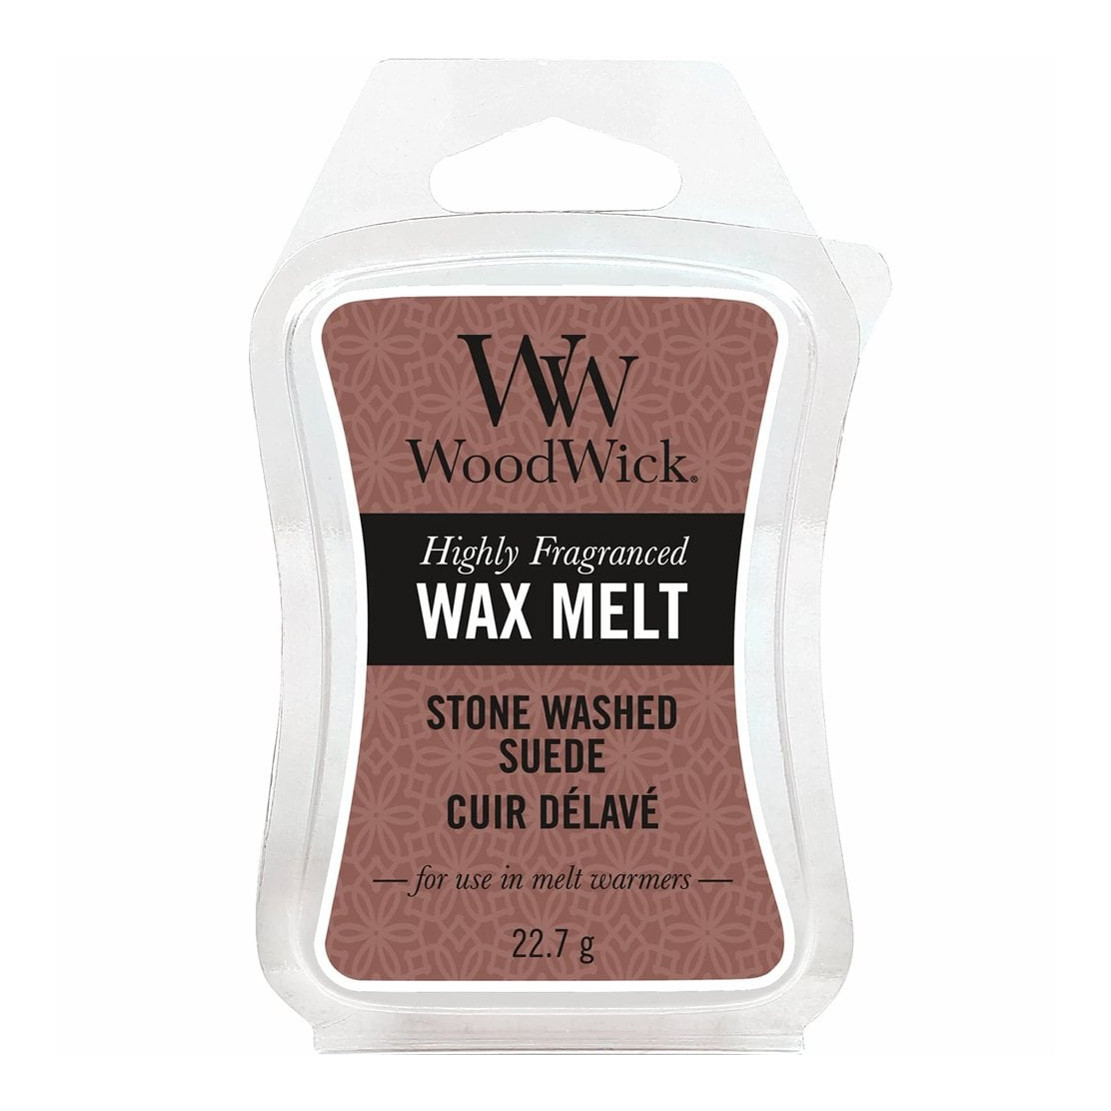 Woodwick Stone Washed Suede Wax Melt